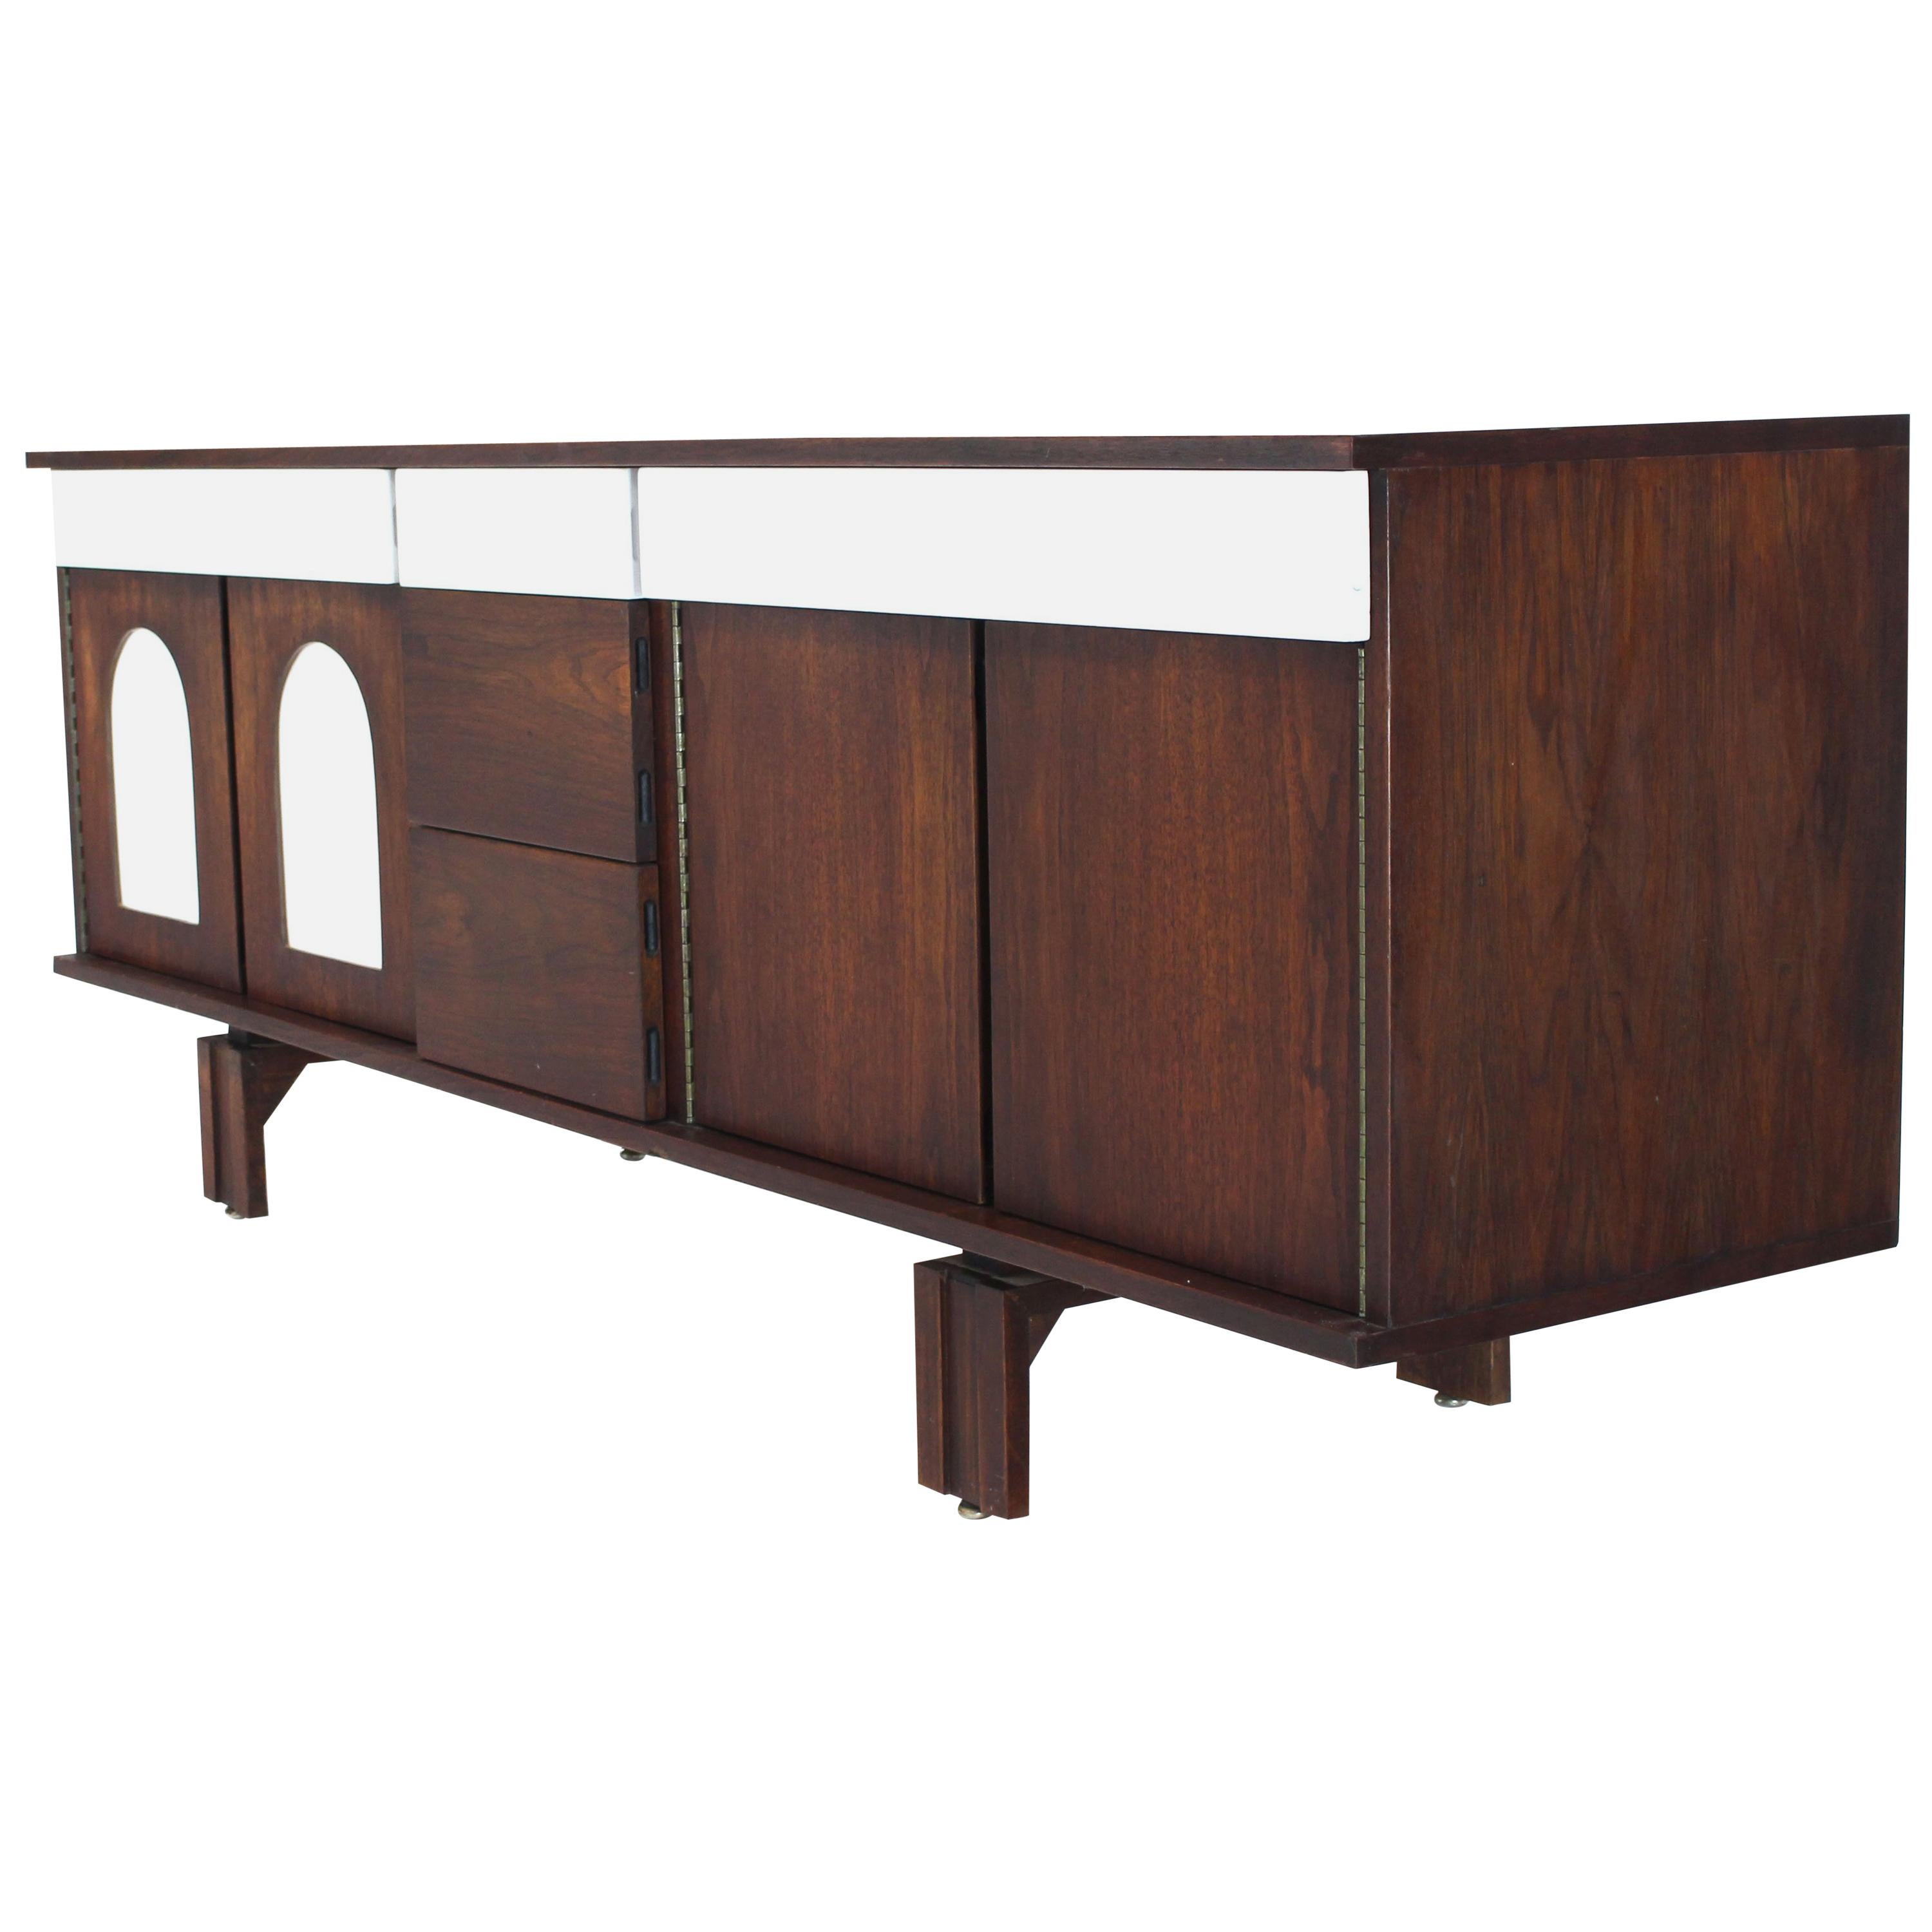 Two-Tone White Lacquer Oiled Walnut Low Long Credenza Dresser Cabinet For Sale